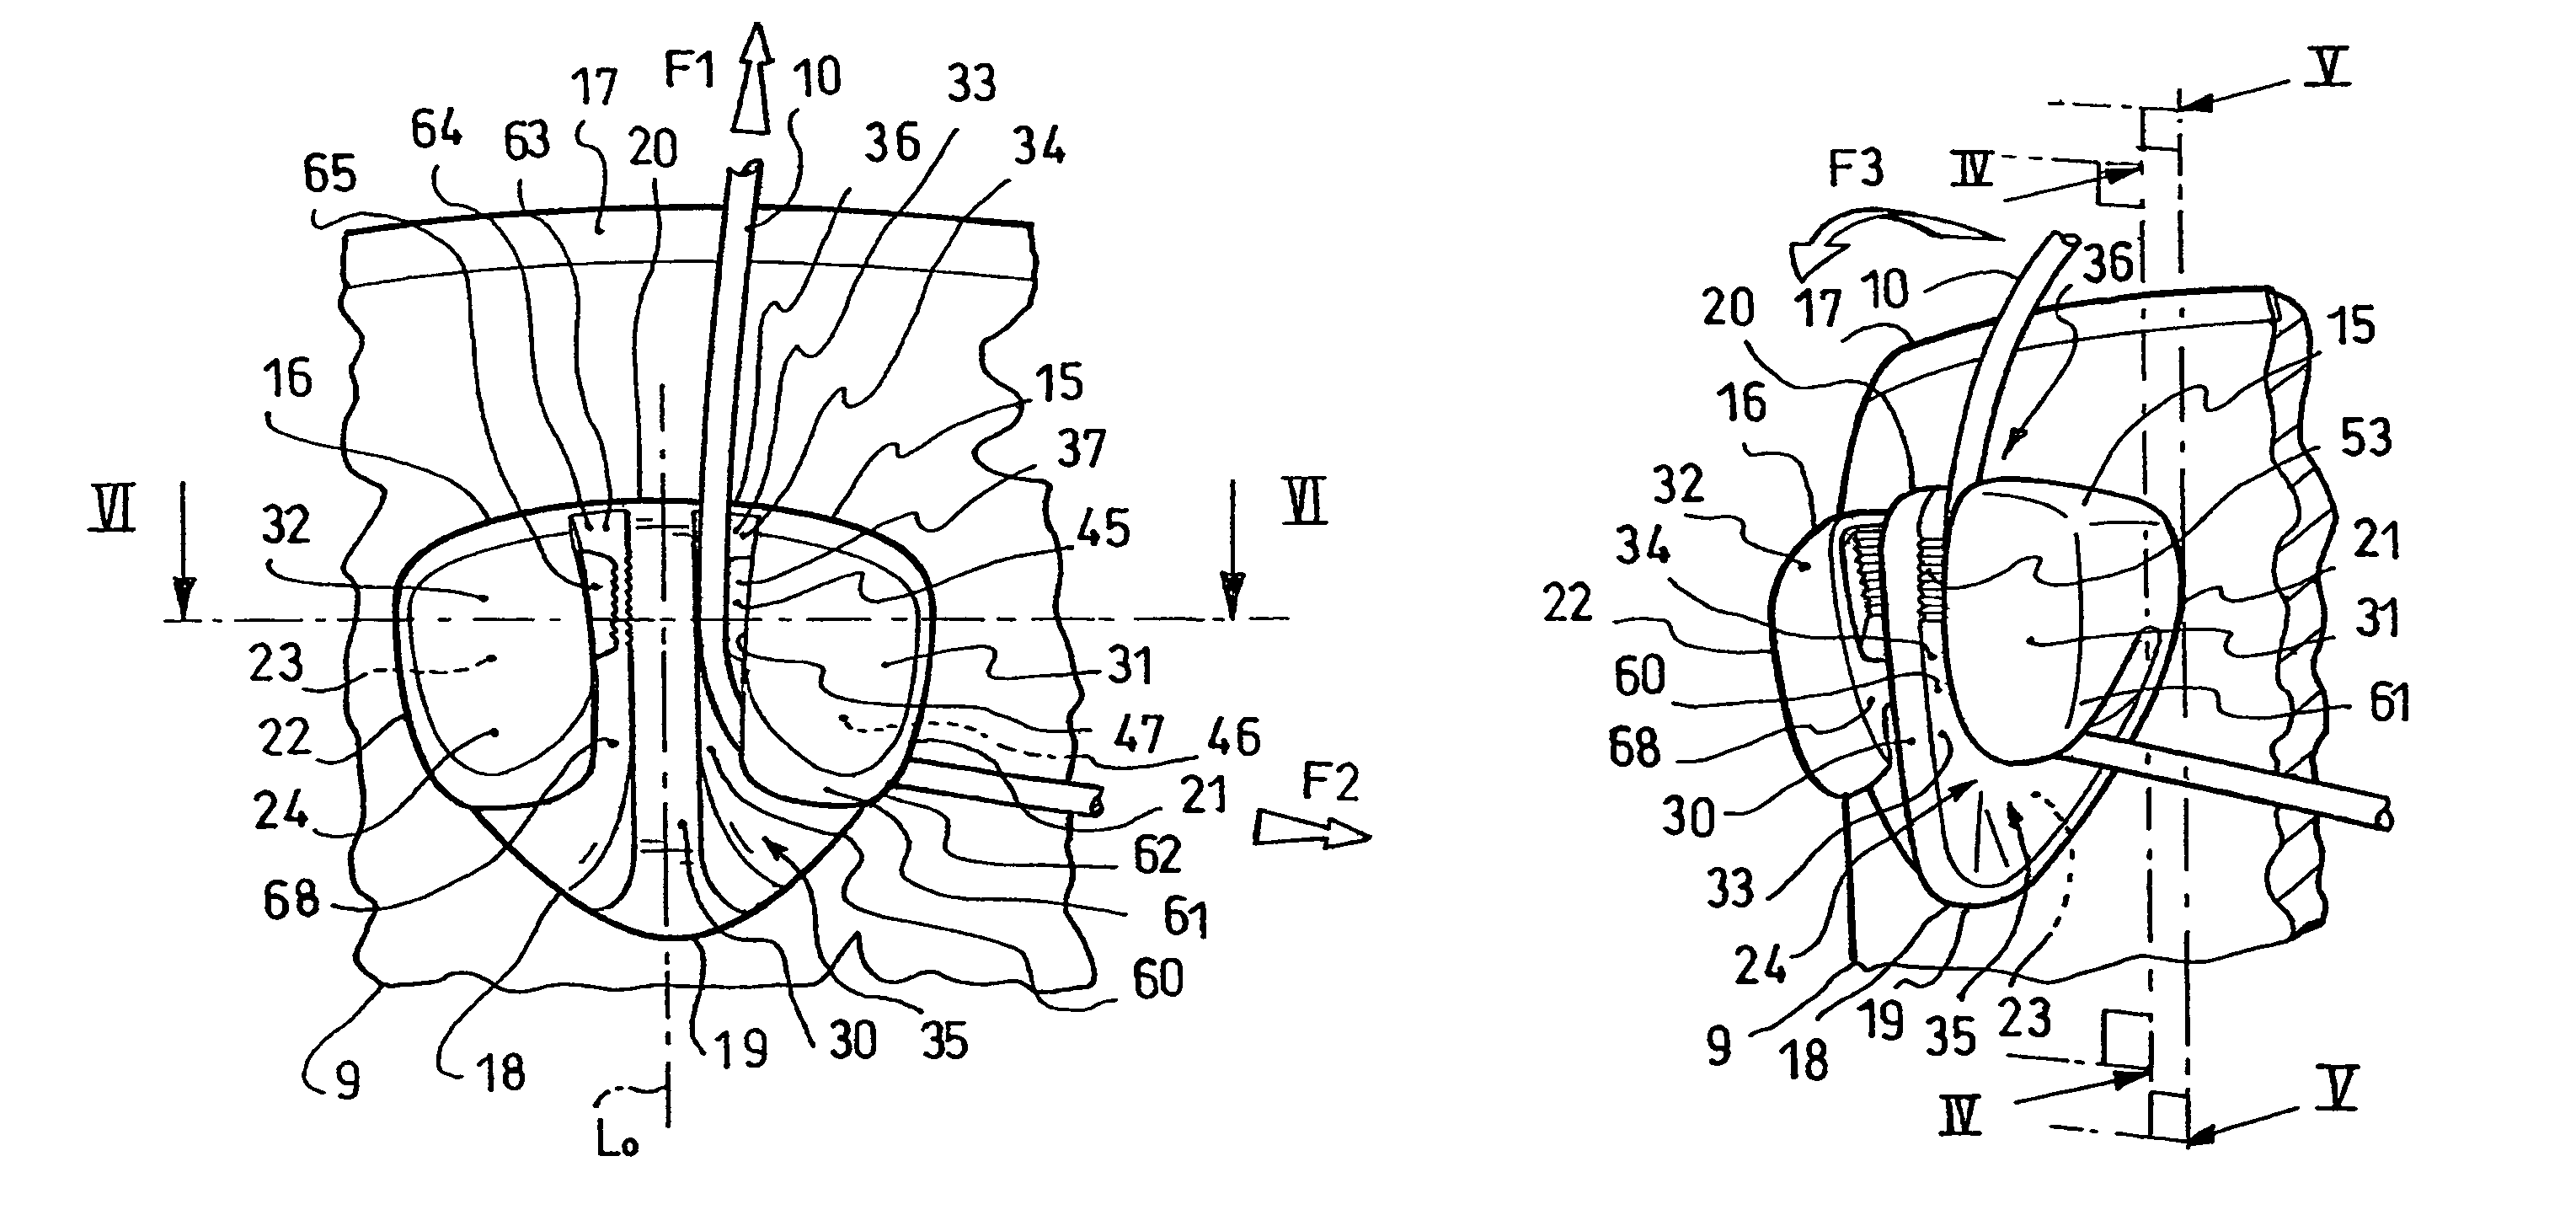 Device for blocking flexible strands